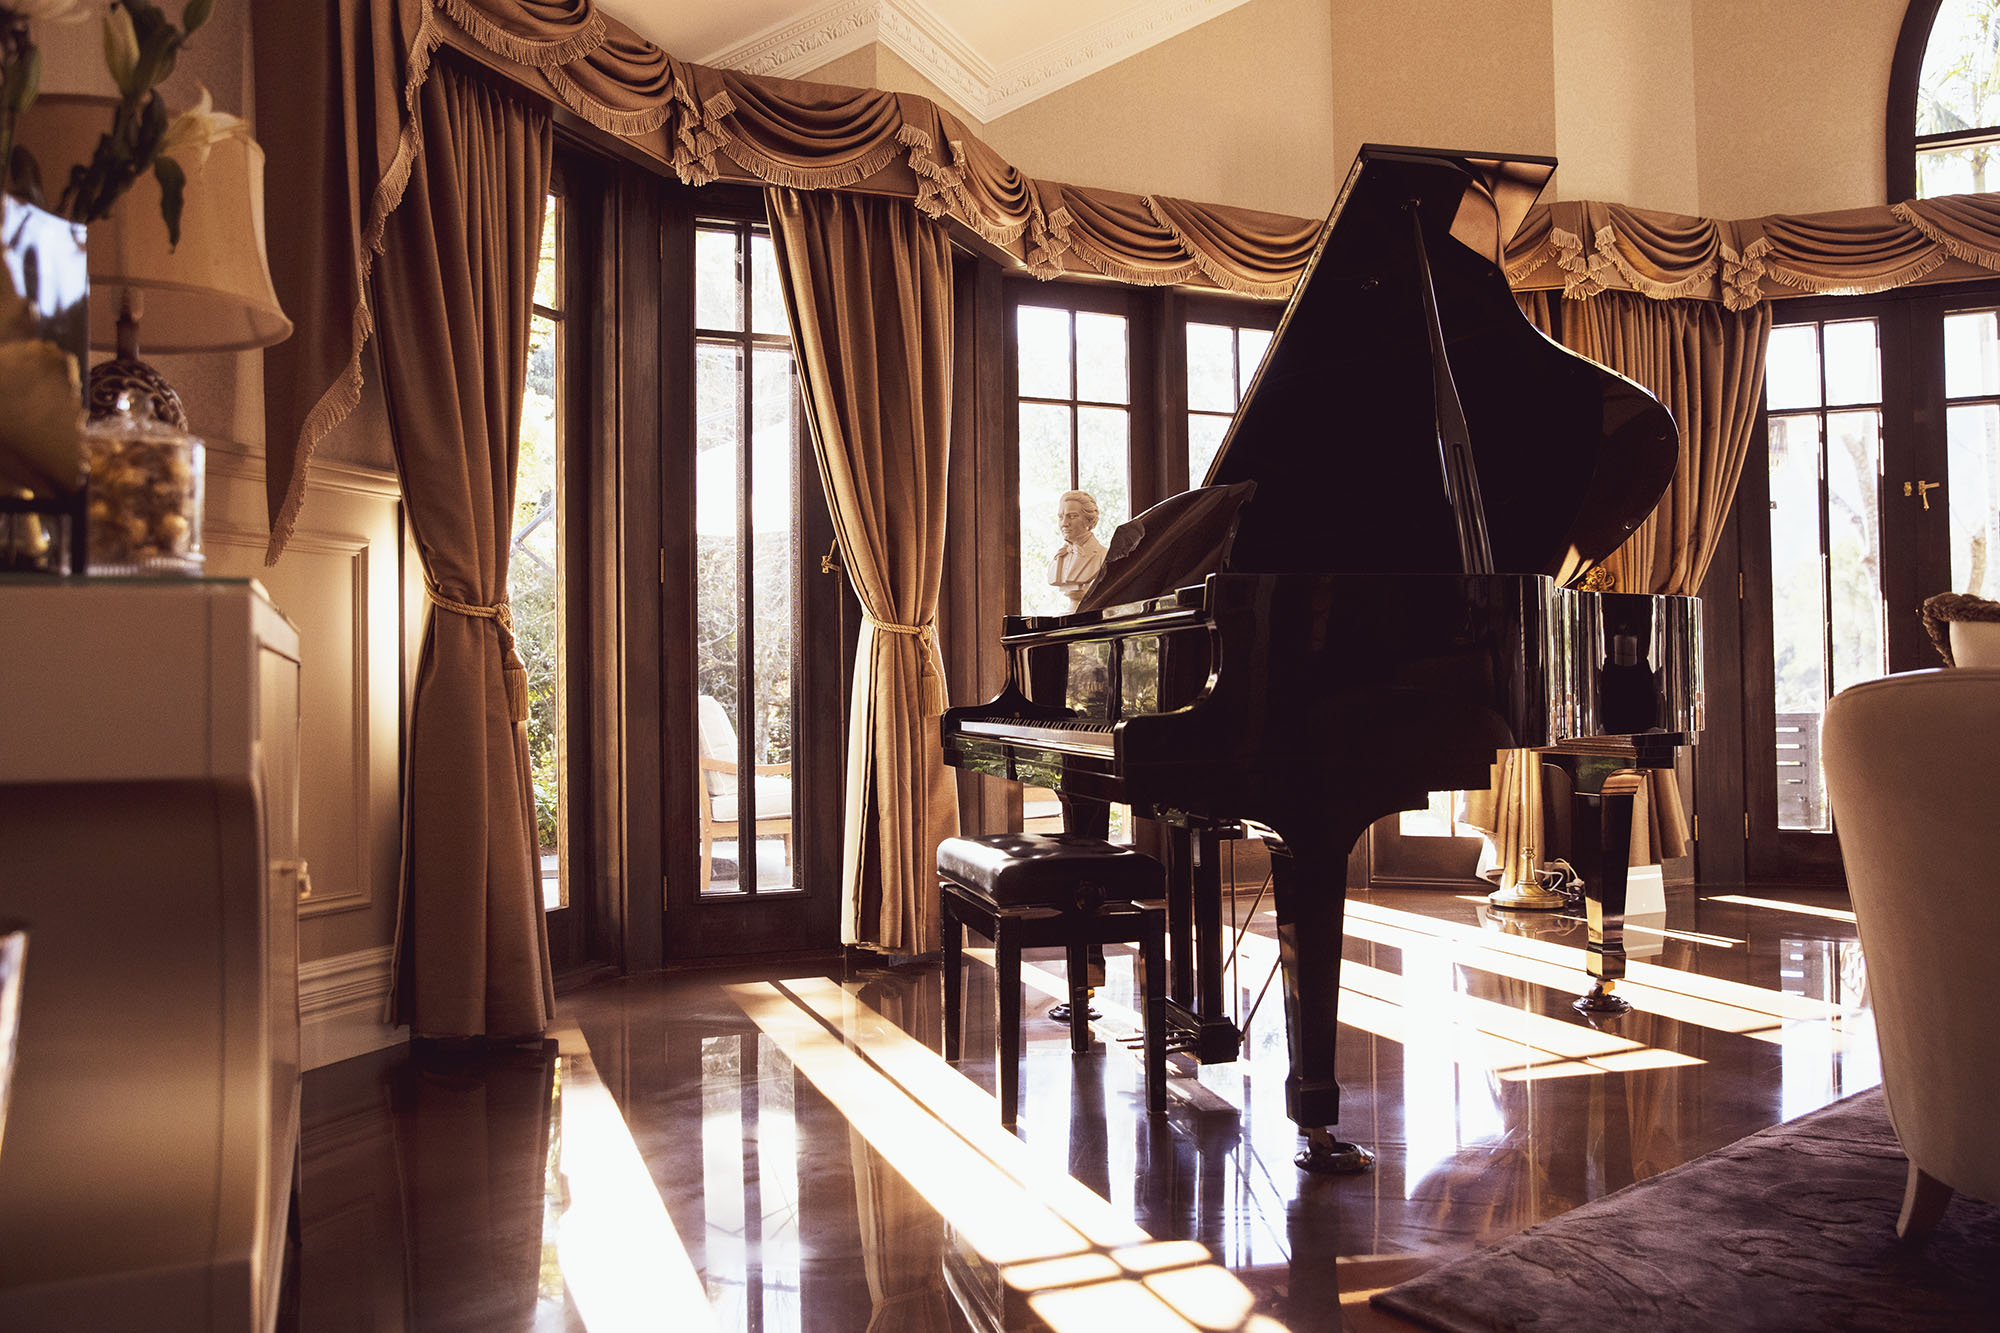 Hermitage Estate sumptuous living room and grand piano. View the large size image to get the full effect!